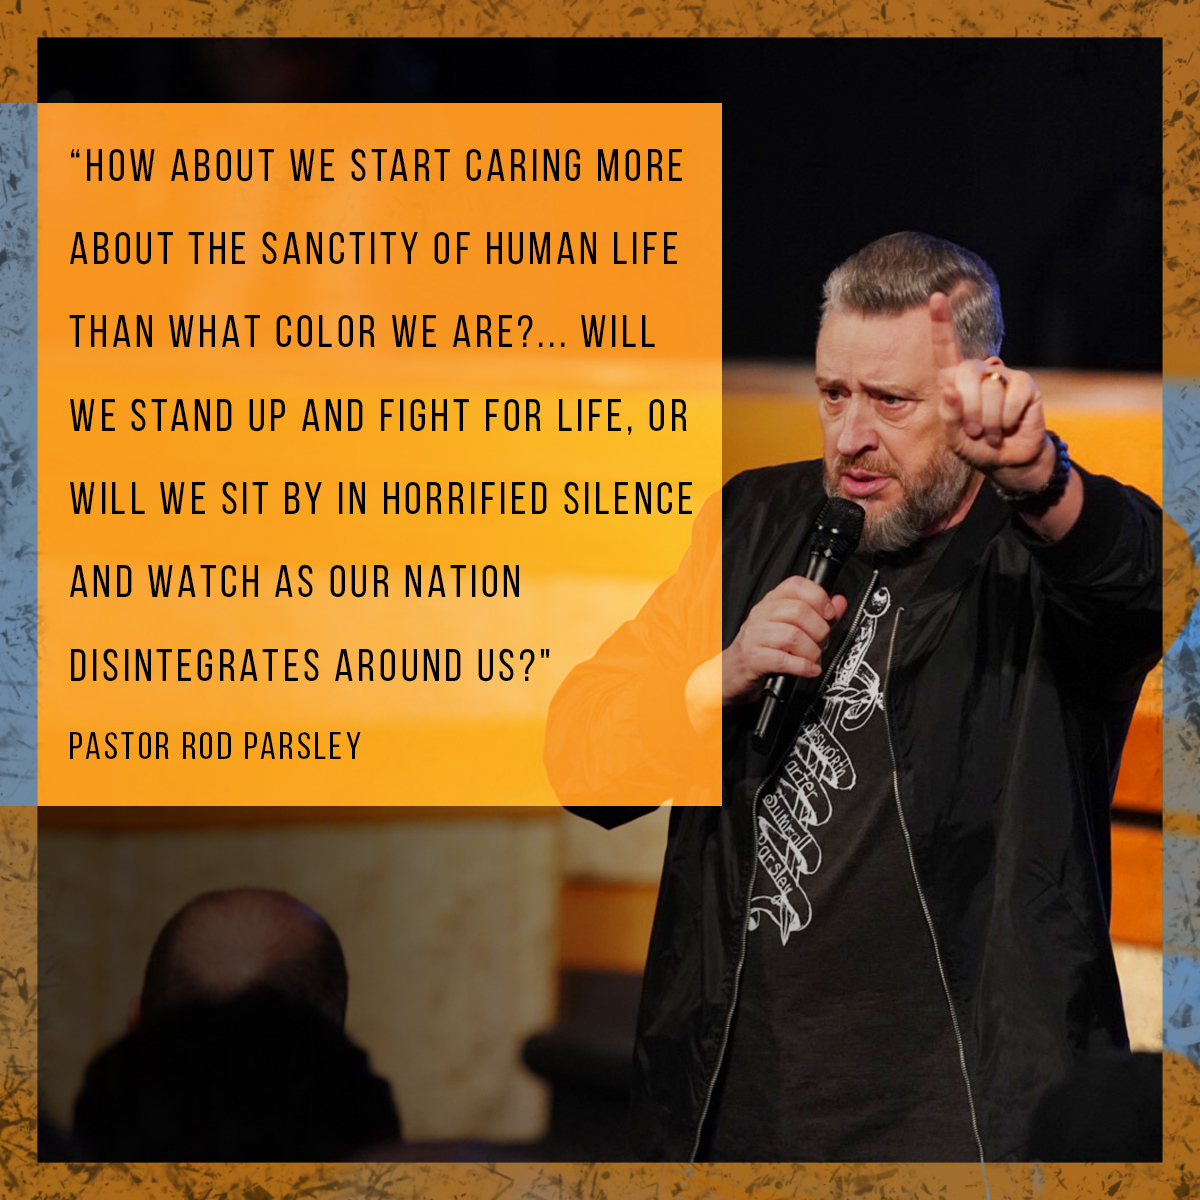 “How about we start caring more about the sanctity of human life than what color we are?... Will we stand up and fight for life, or will we sit by in horrified silence and watch as our nation disintegrates around us?” – Pastor Rod Parsley